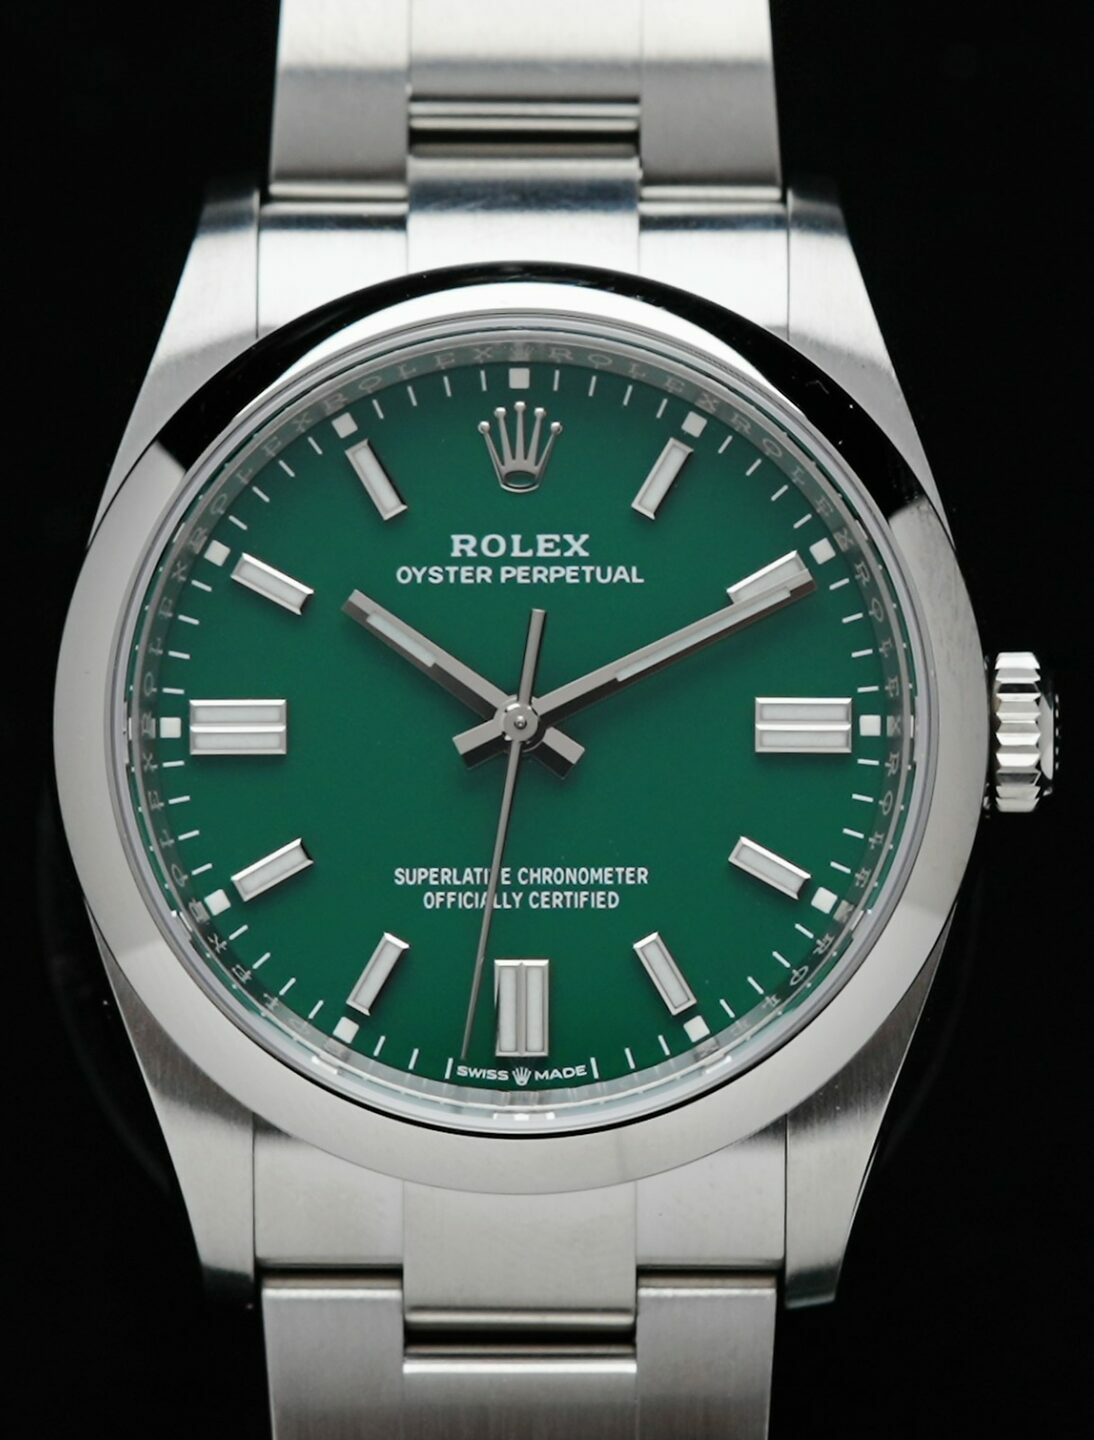 Rolex Oyster Perpetual 36 Green 2022 watch featured under white lighting.